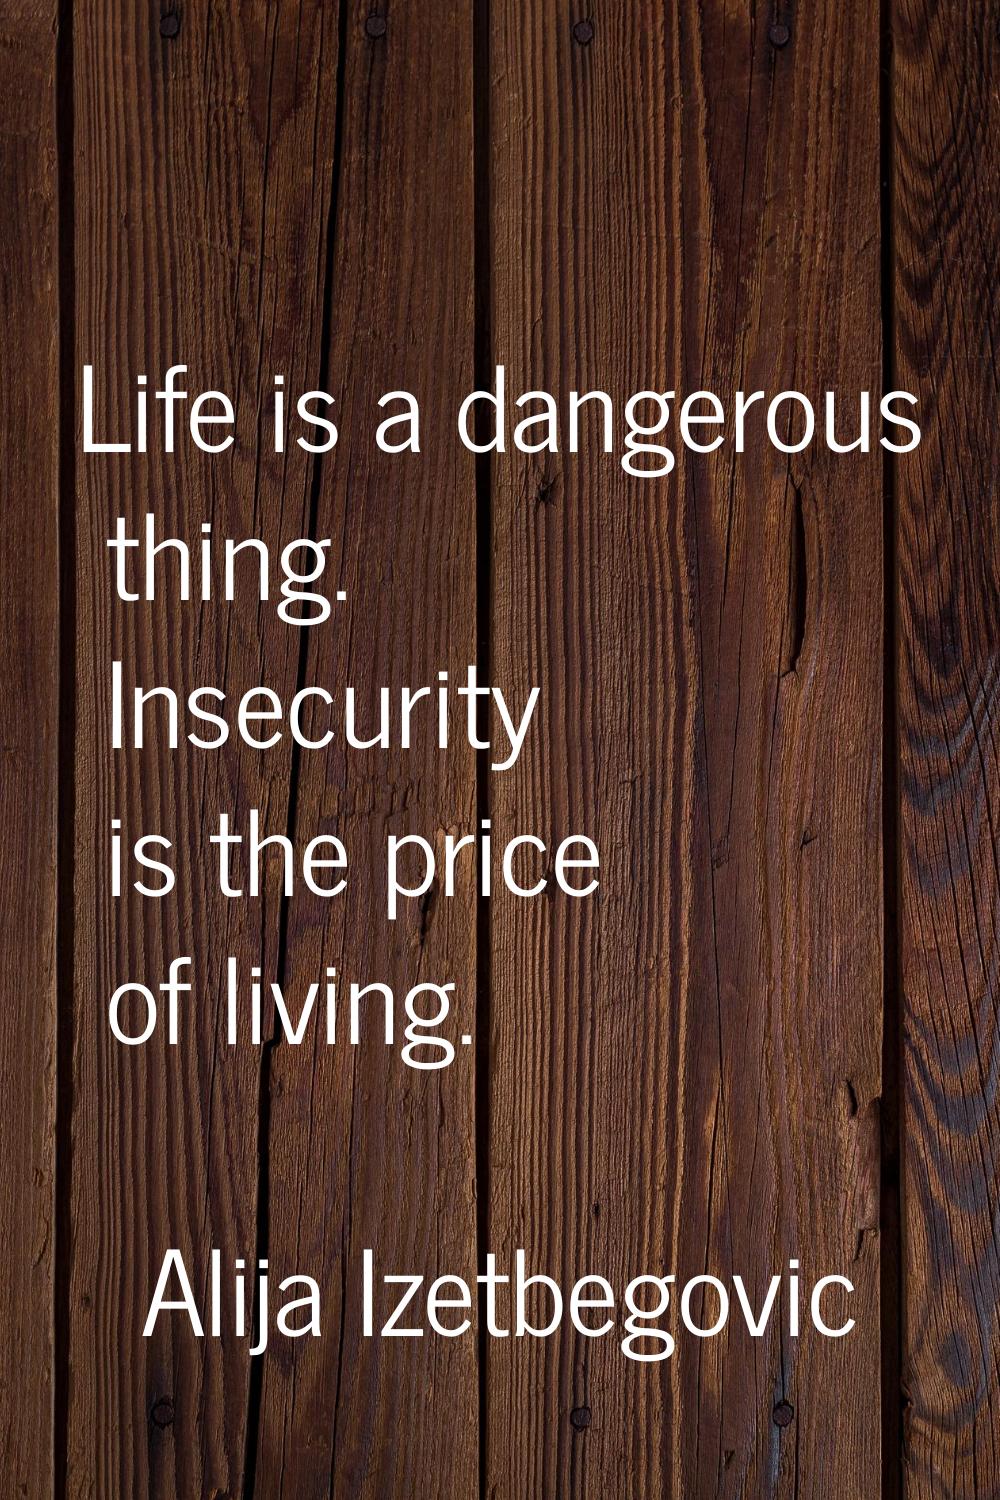 Life is a dangerous thing. Insecurity is the price of living.